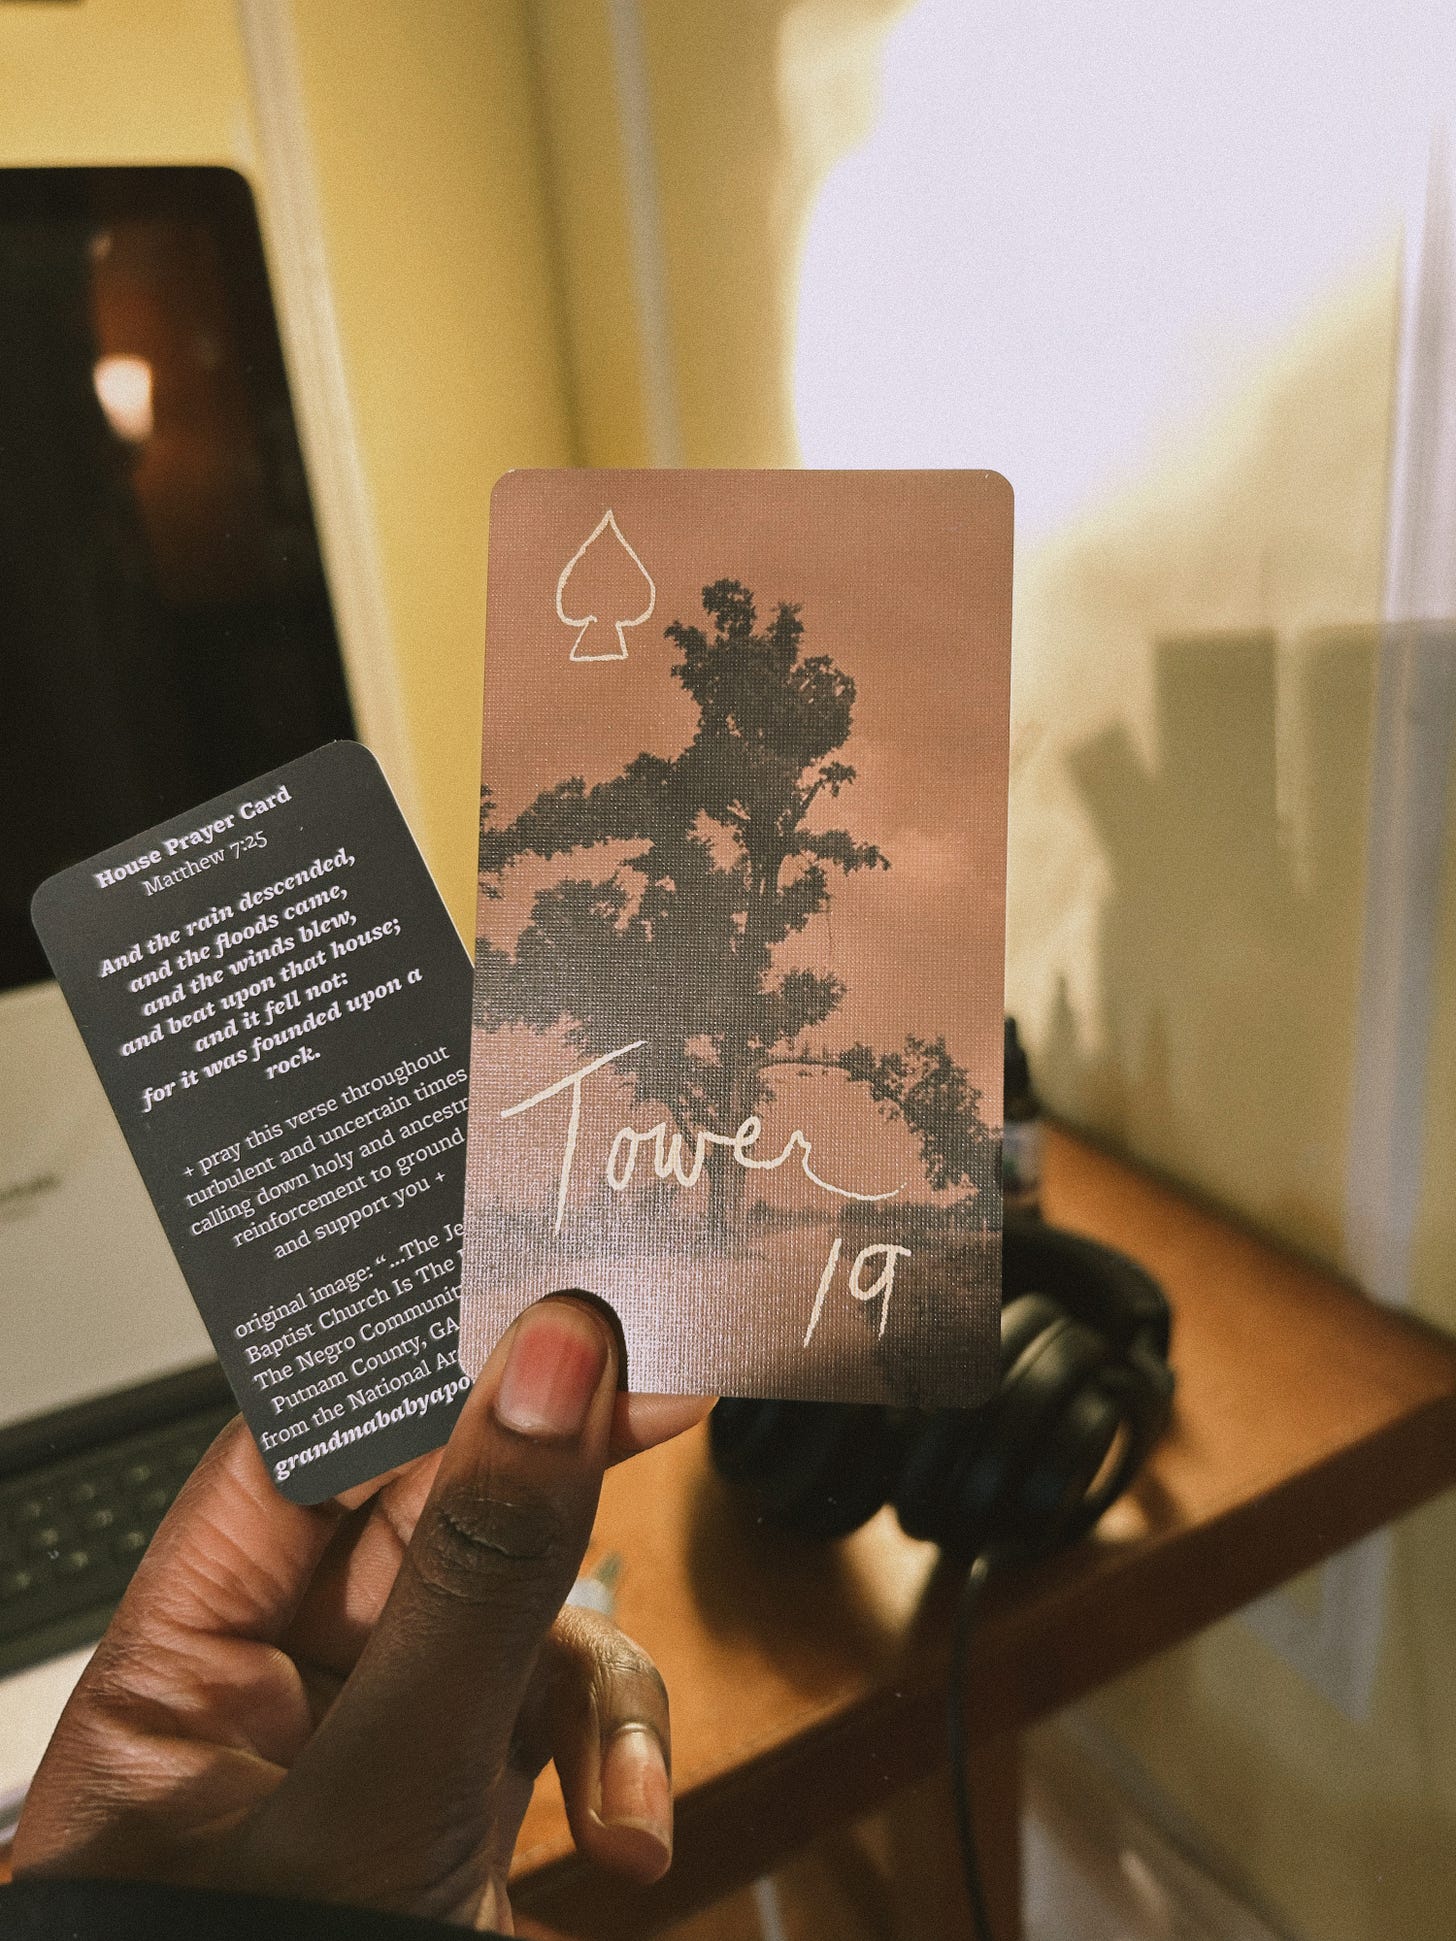 Ismatu holds the card they drew for this essay in the new morning light. There are two cards in their hand: one that is smaller, black, and quotes Matthew 7:25 and another larger card with a tree in sepia tones, a drawn spade, and a handwritten note: Tower